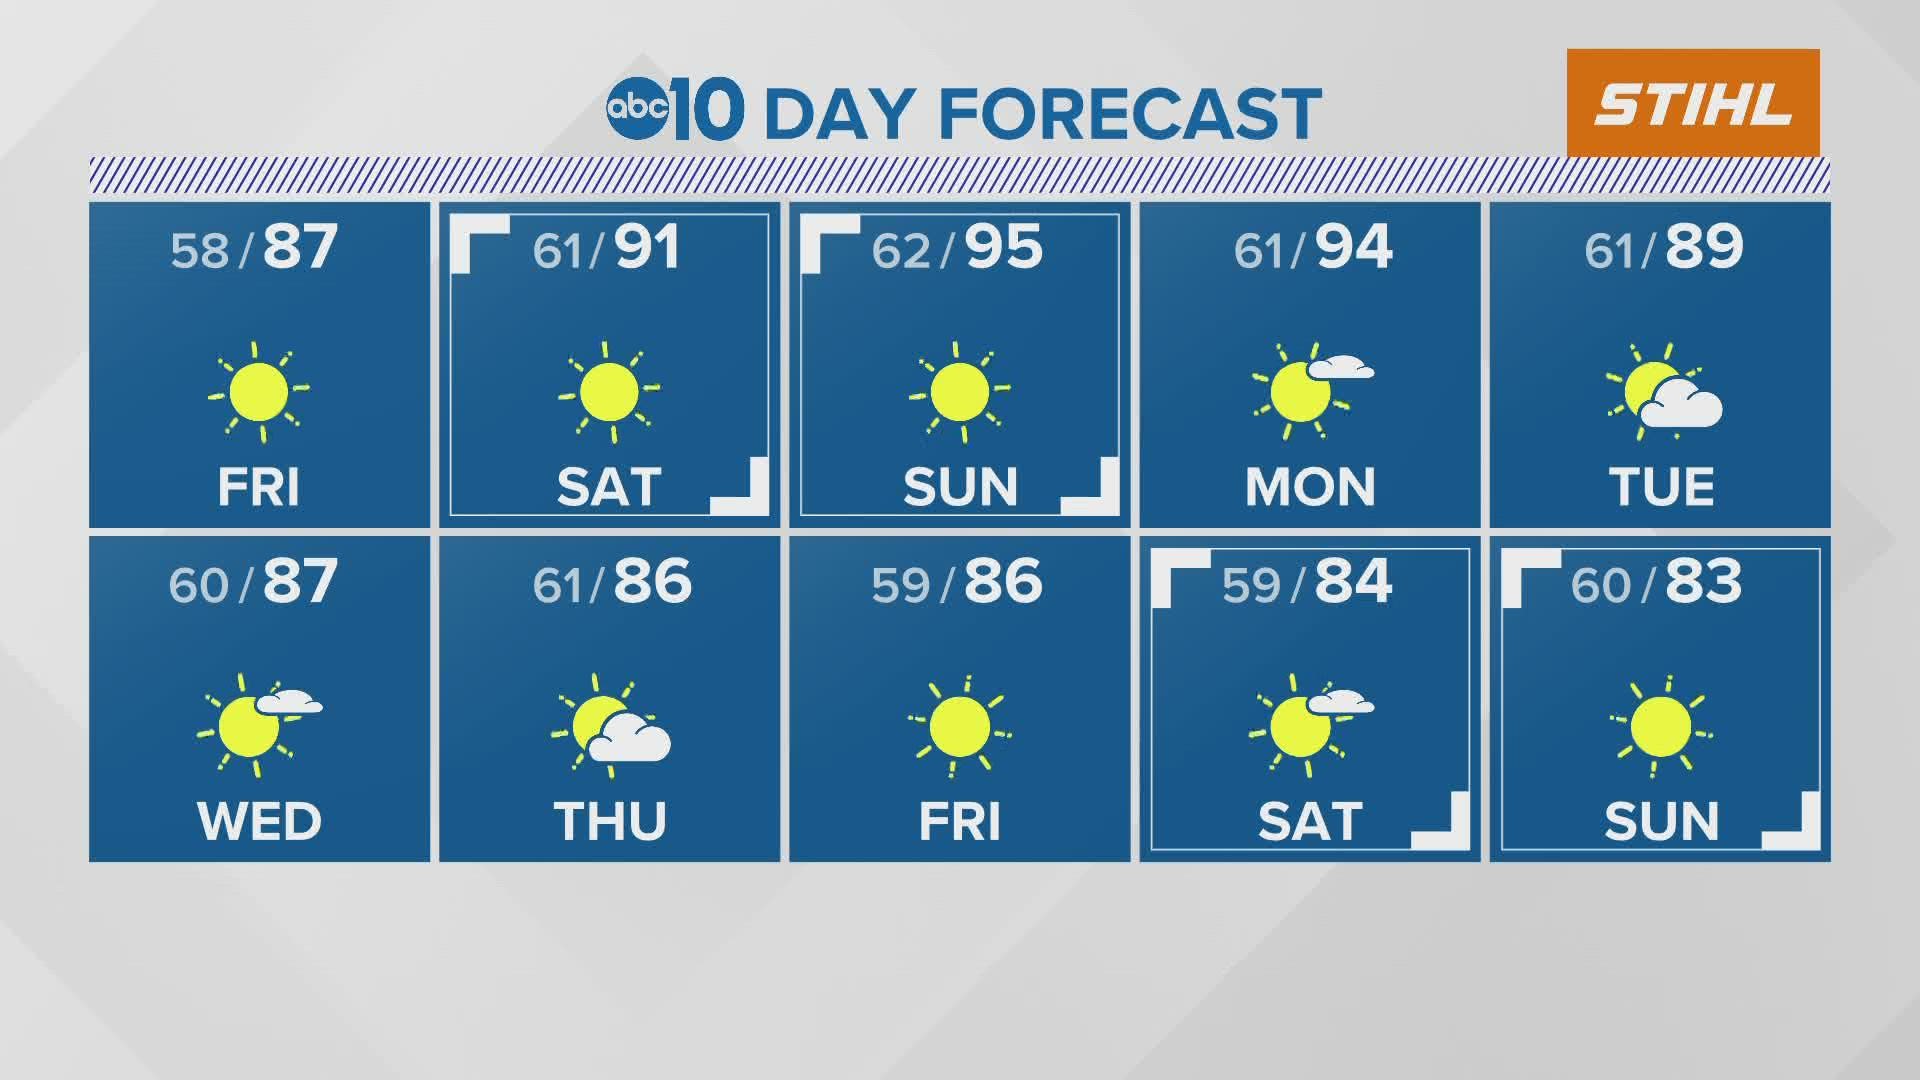 Our Carley Gomez shows us what the next 10 days of weather will look like in Sacramento.